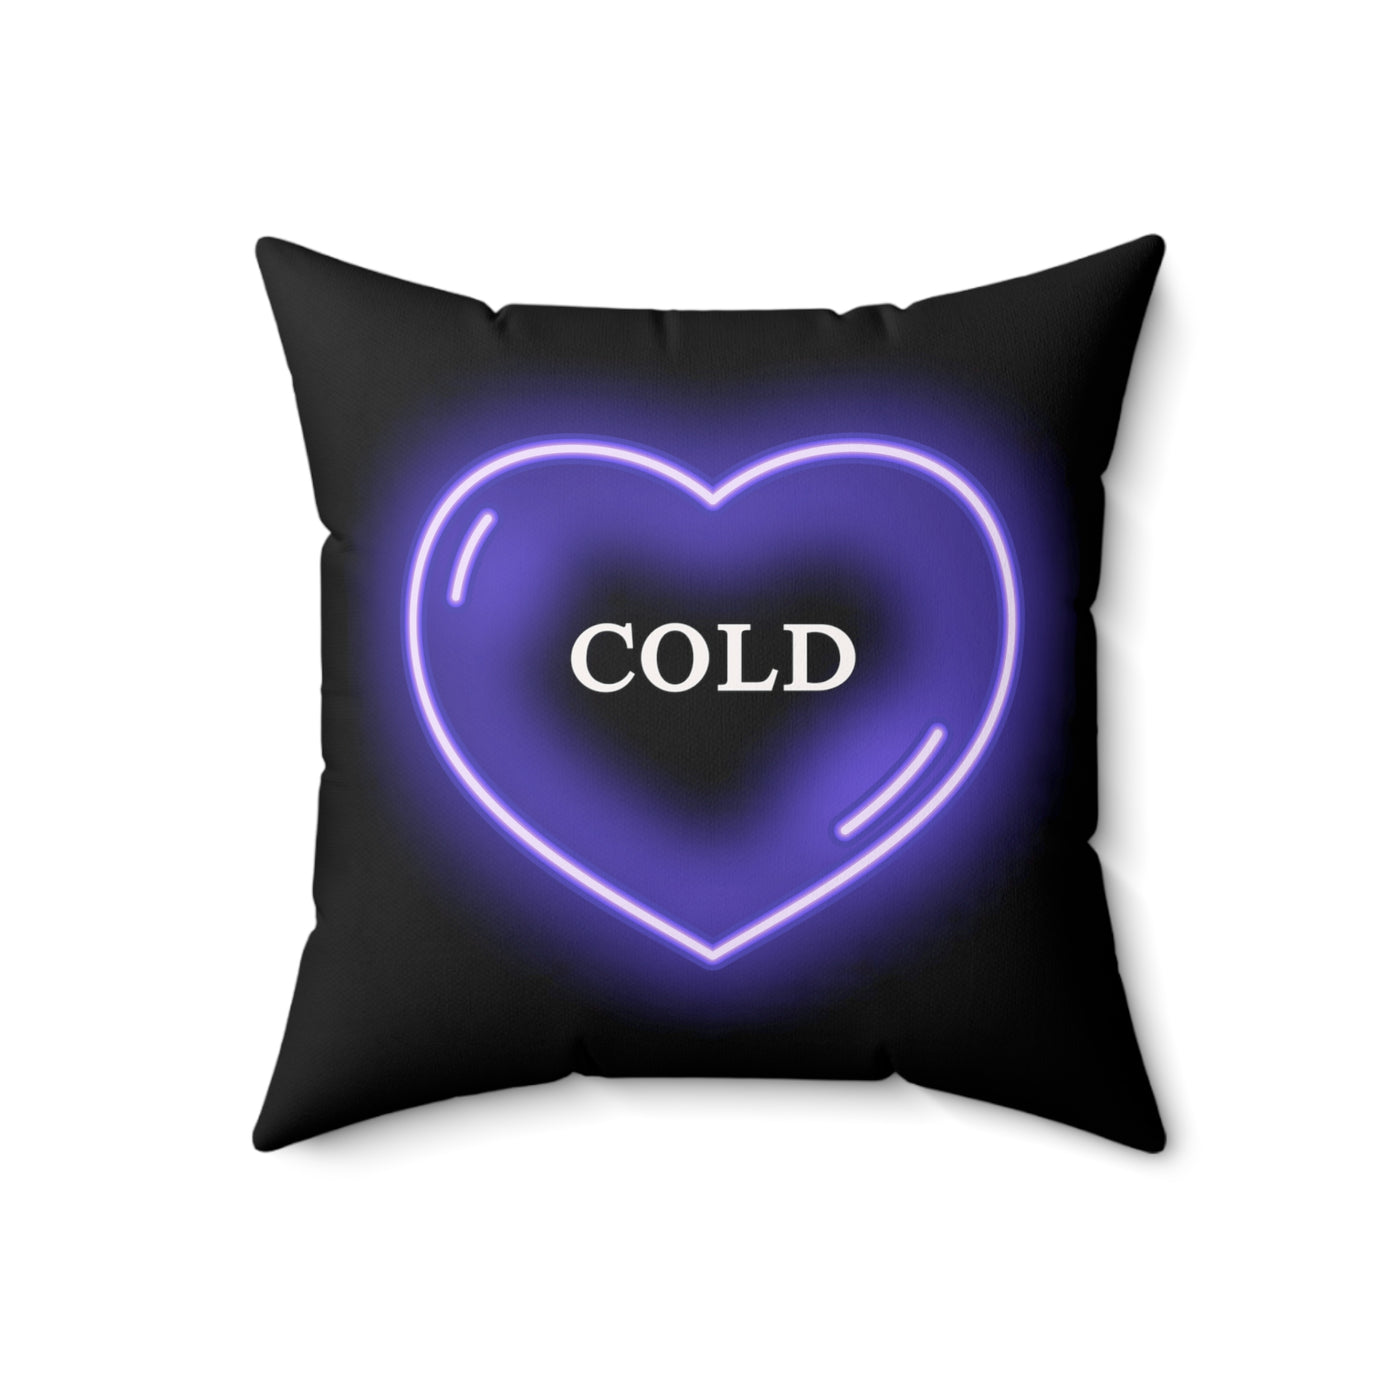 Love Mood Fantasy HOT or COLD Spun Polyester Square Pillow